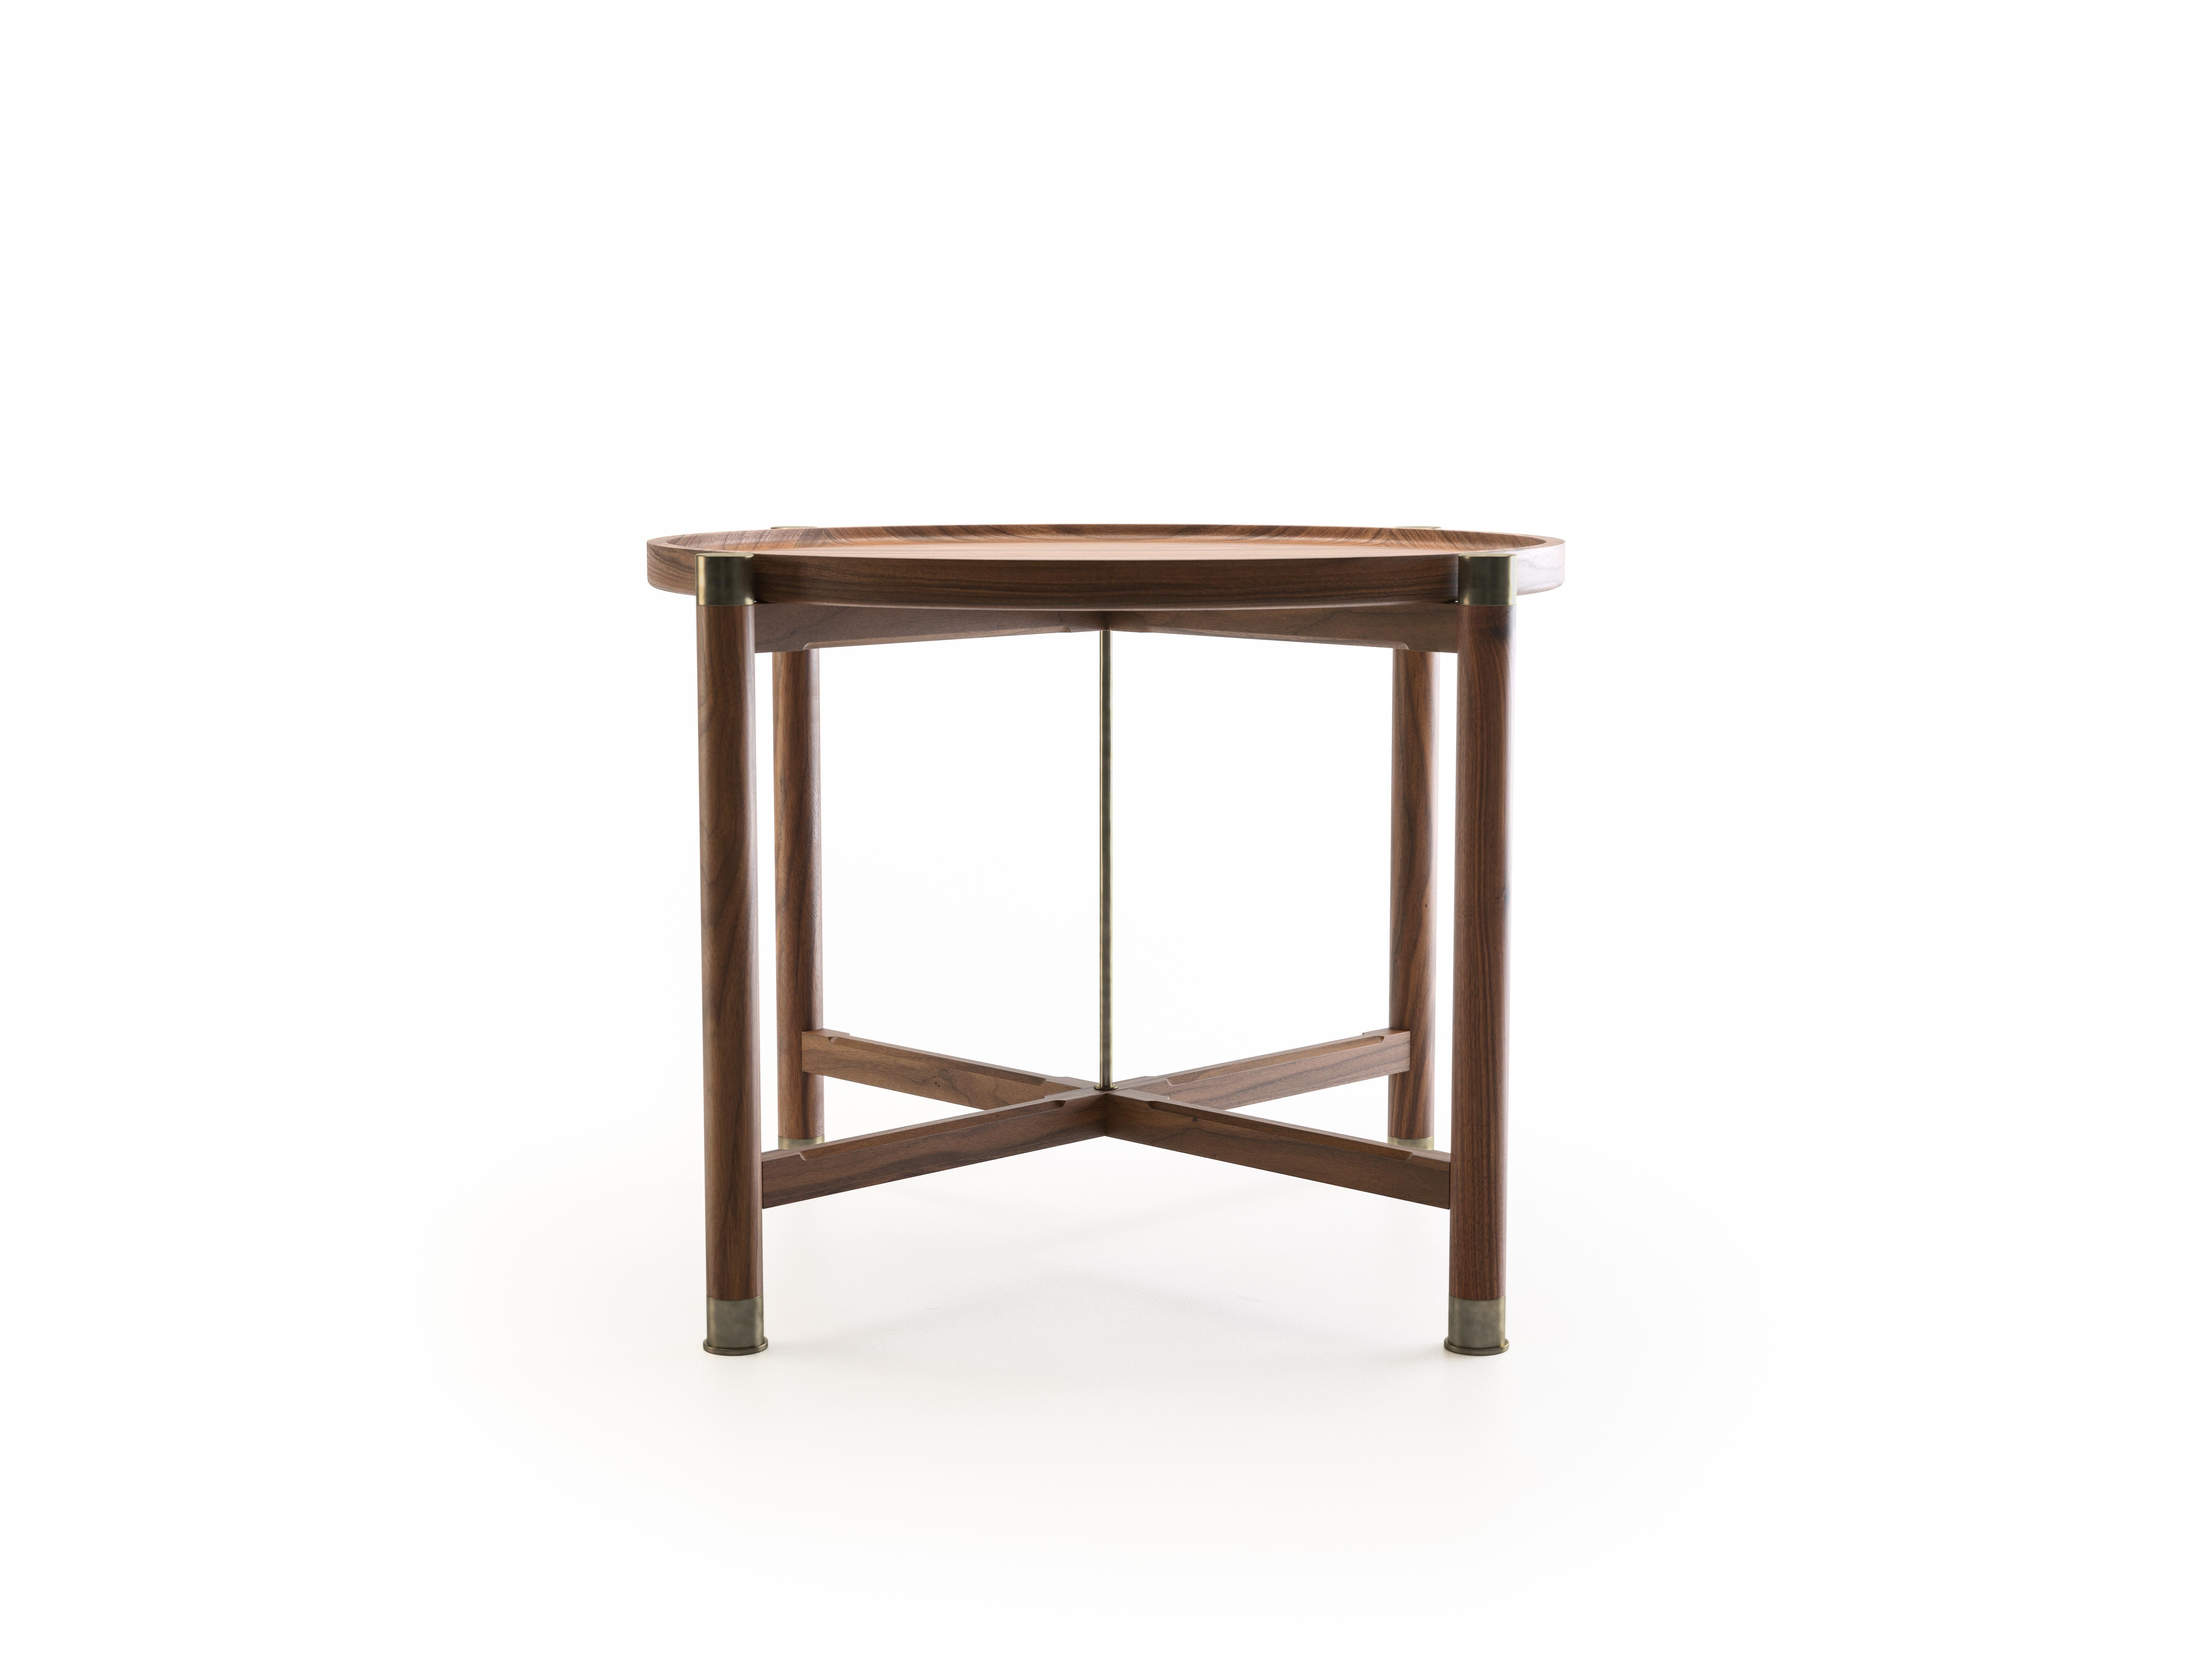 The Otto side table is a generously proportioned table with a simple, well, articulated form.
Available in walnut or oak, it features a round coupe top, substantial antique brass fittings, a central brass stem, and sleek chamfered stretchers. The